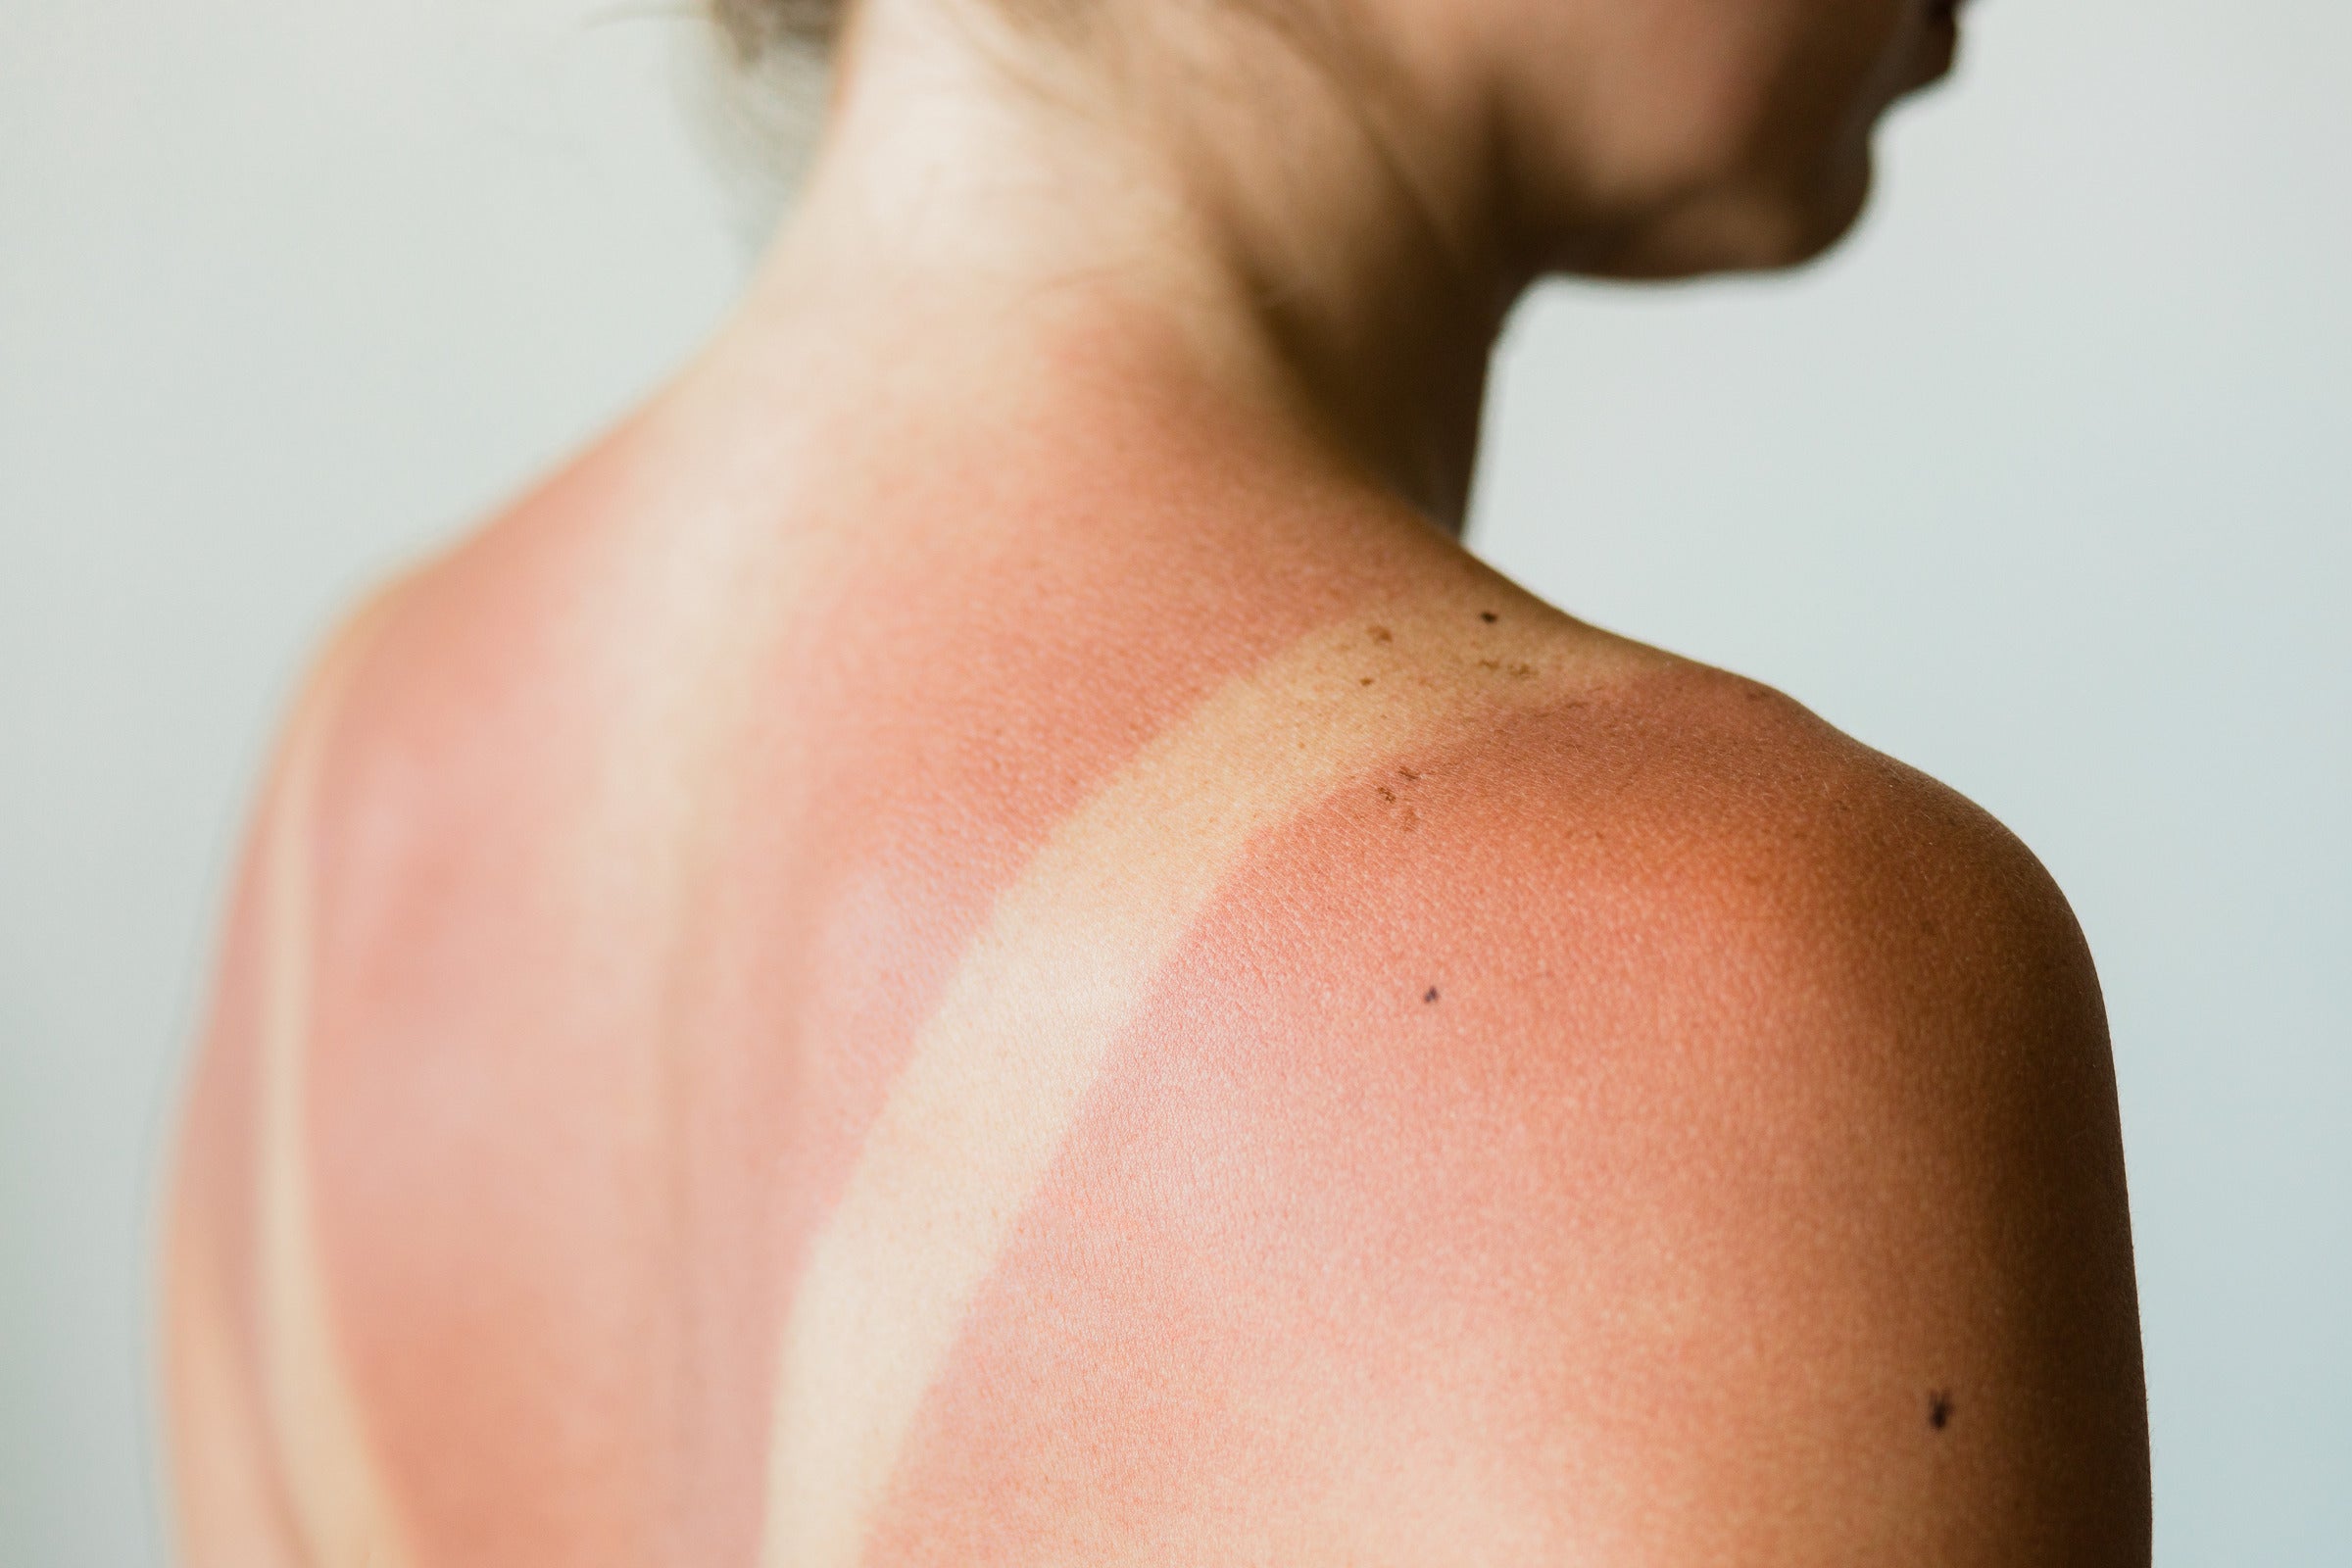 The 4 reasons you're more likely to get burned in summer